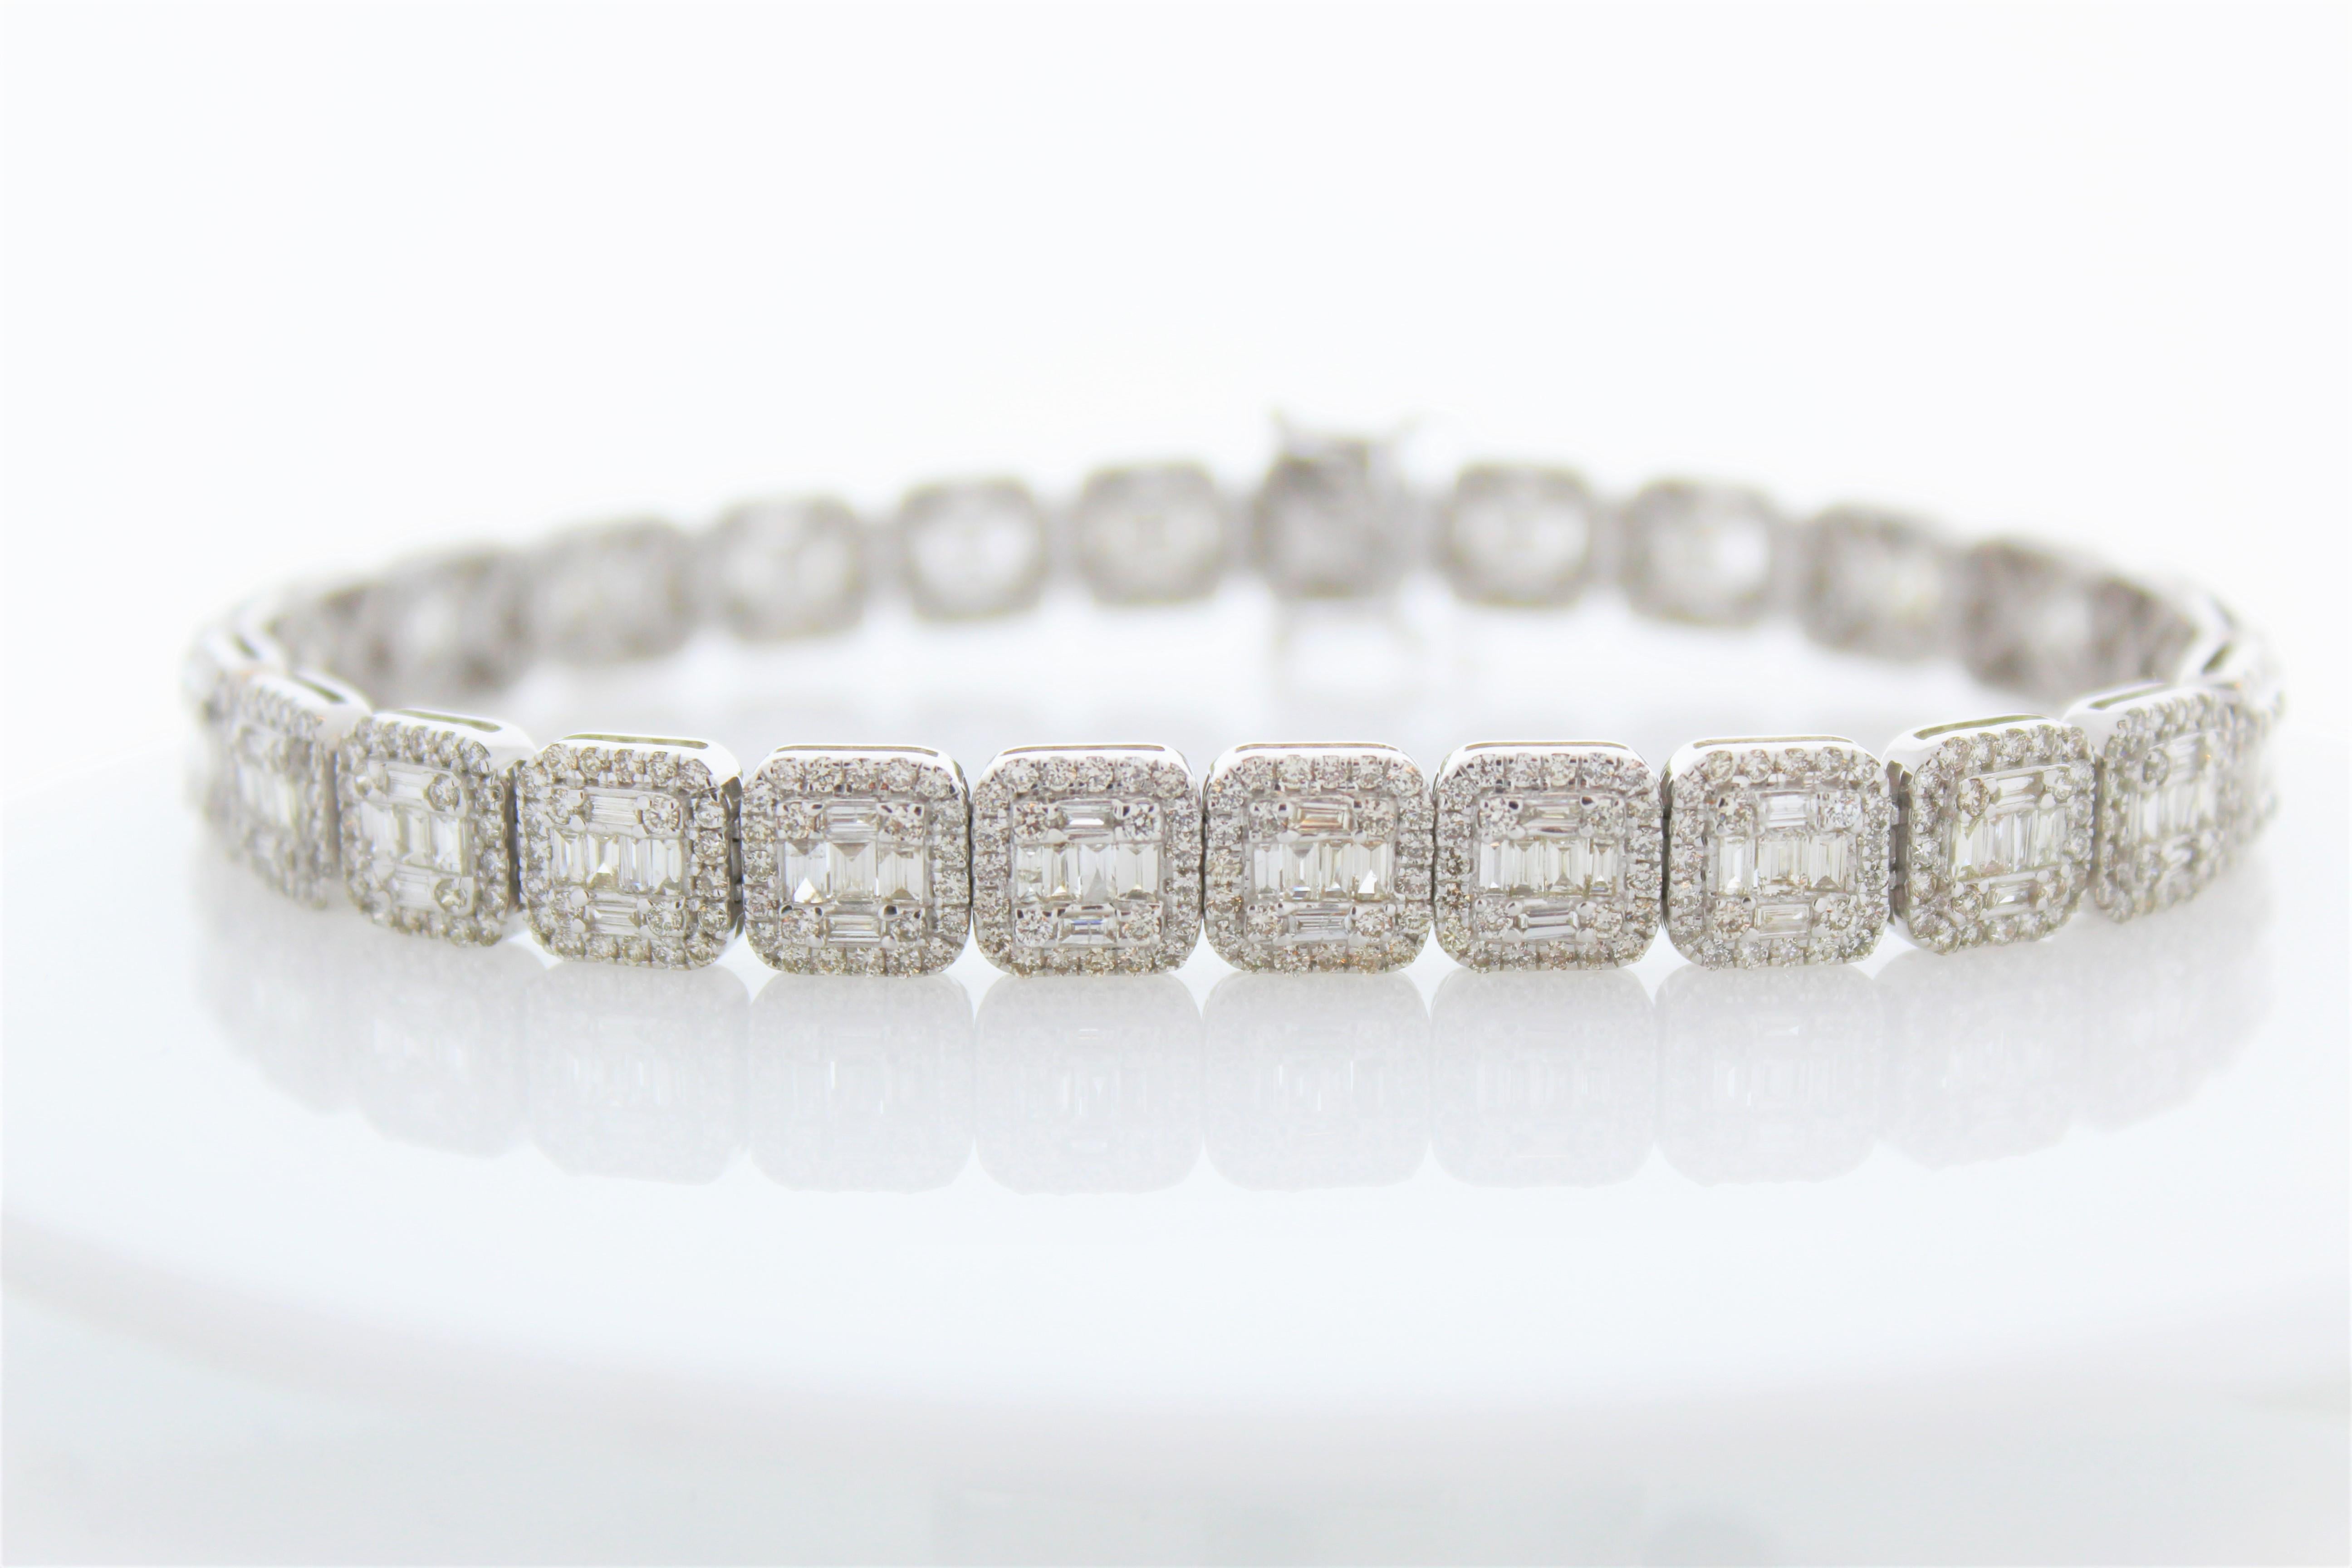 This diamond bracelet features 6.70 carats made up of 6.70 perfectly natural diamonds. They are matched in size, color, and luster. Created in 14K white gold, this beautiful fancy diamond bracelet closes securely. It's elegant on its own or perfect